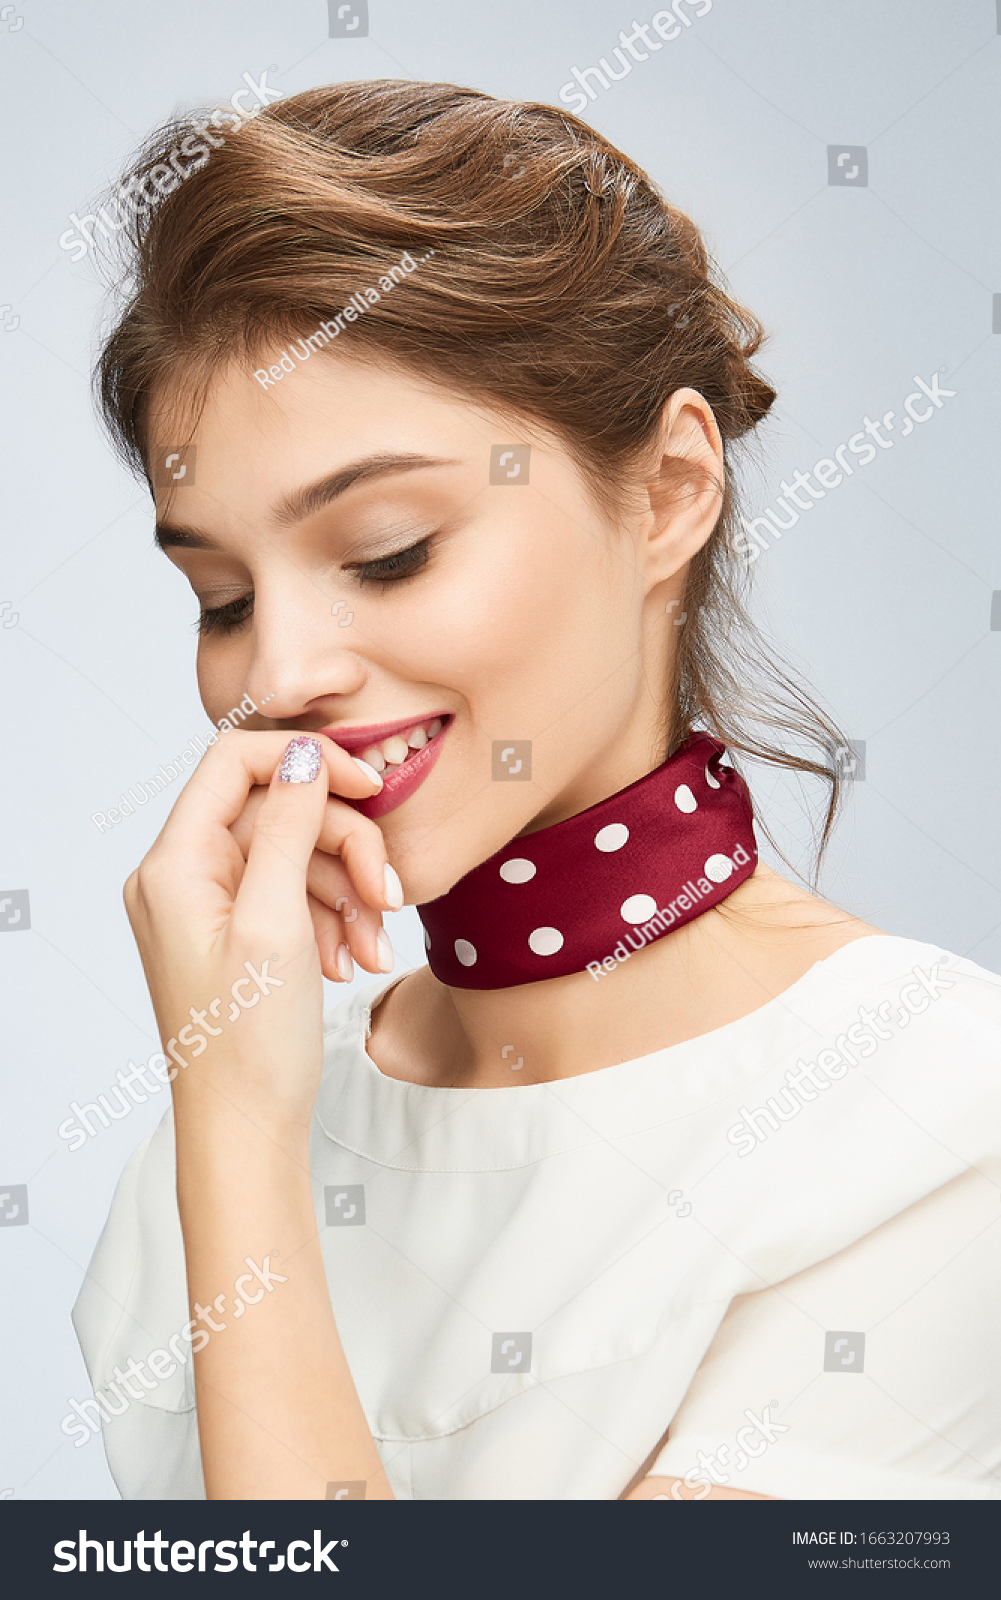 A chestnut-haired lady with careless hairdo in a white blouse is smiling and keeping her finger near the lips. A burgundy silk handkerchief with white polka-dot print is rounding the girl's neck. #1663207993